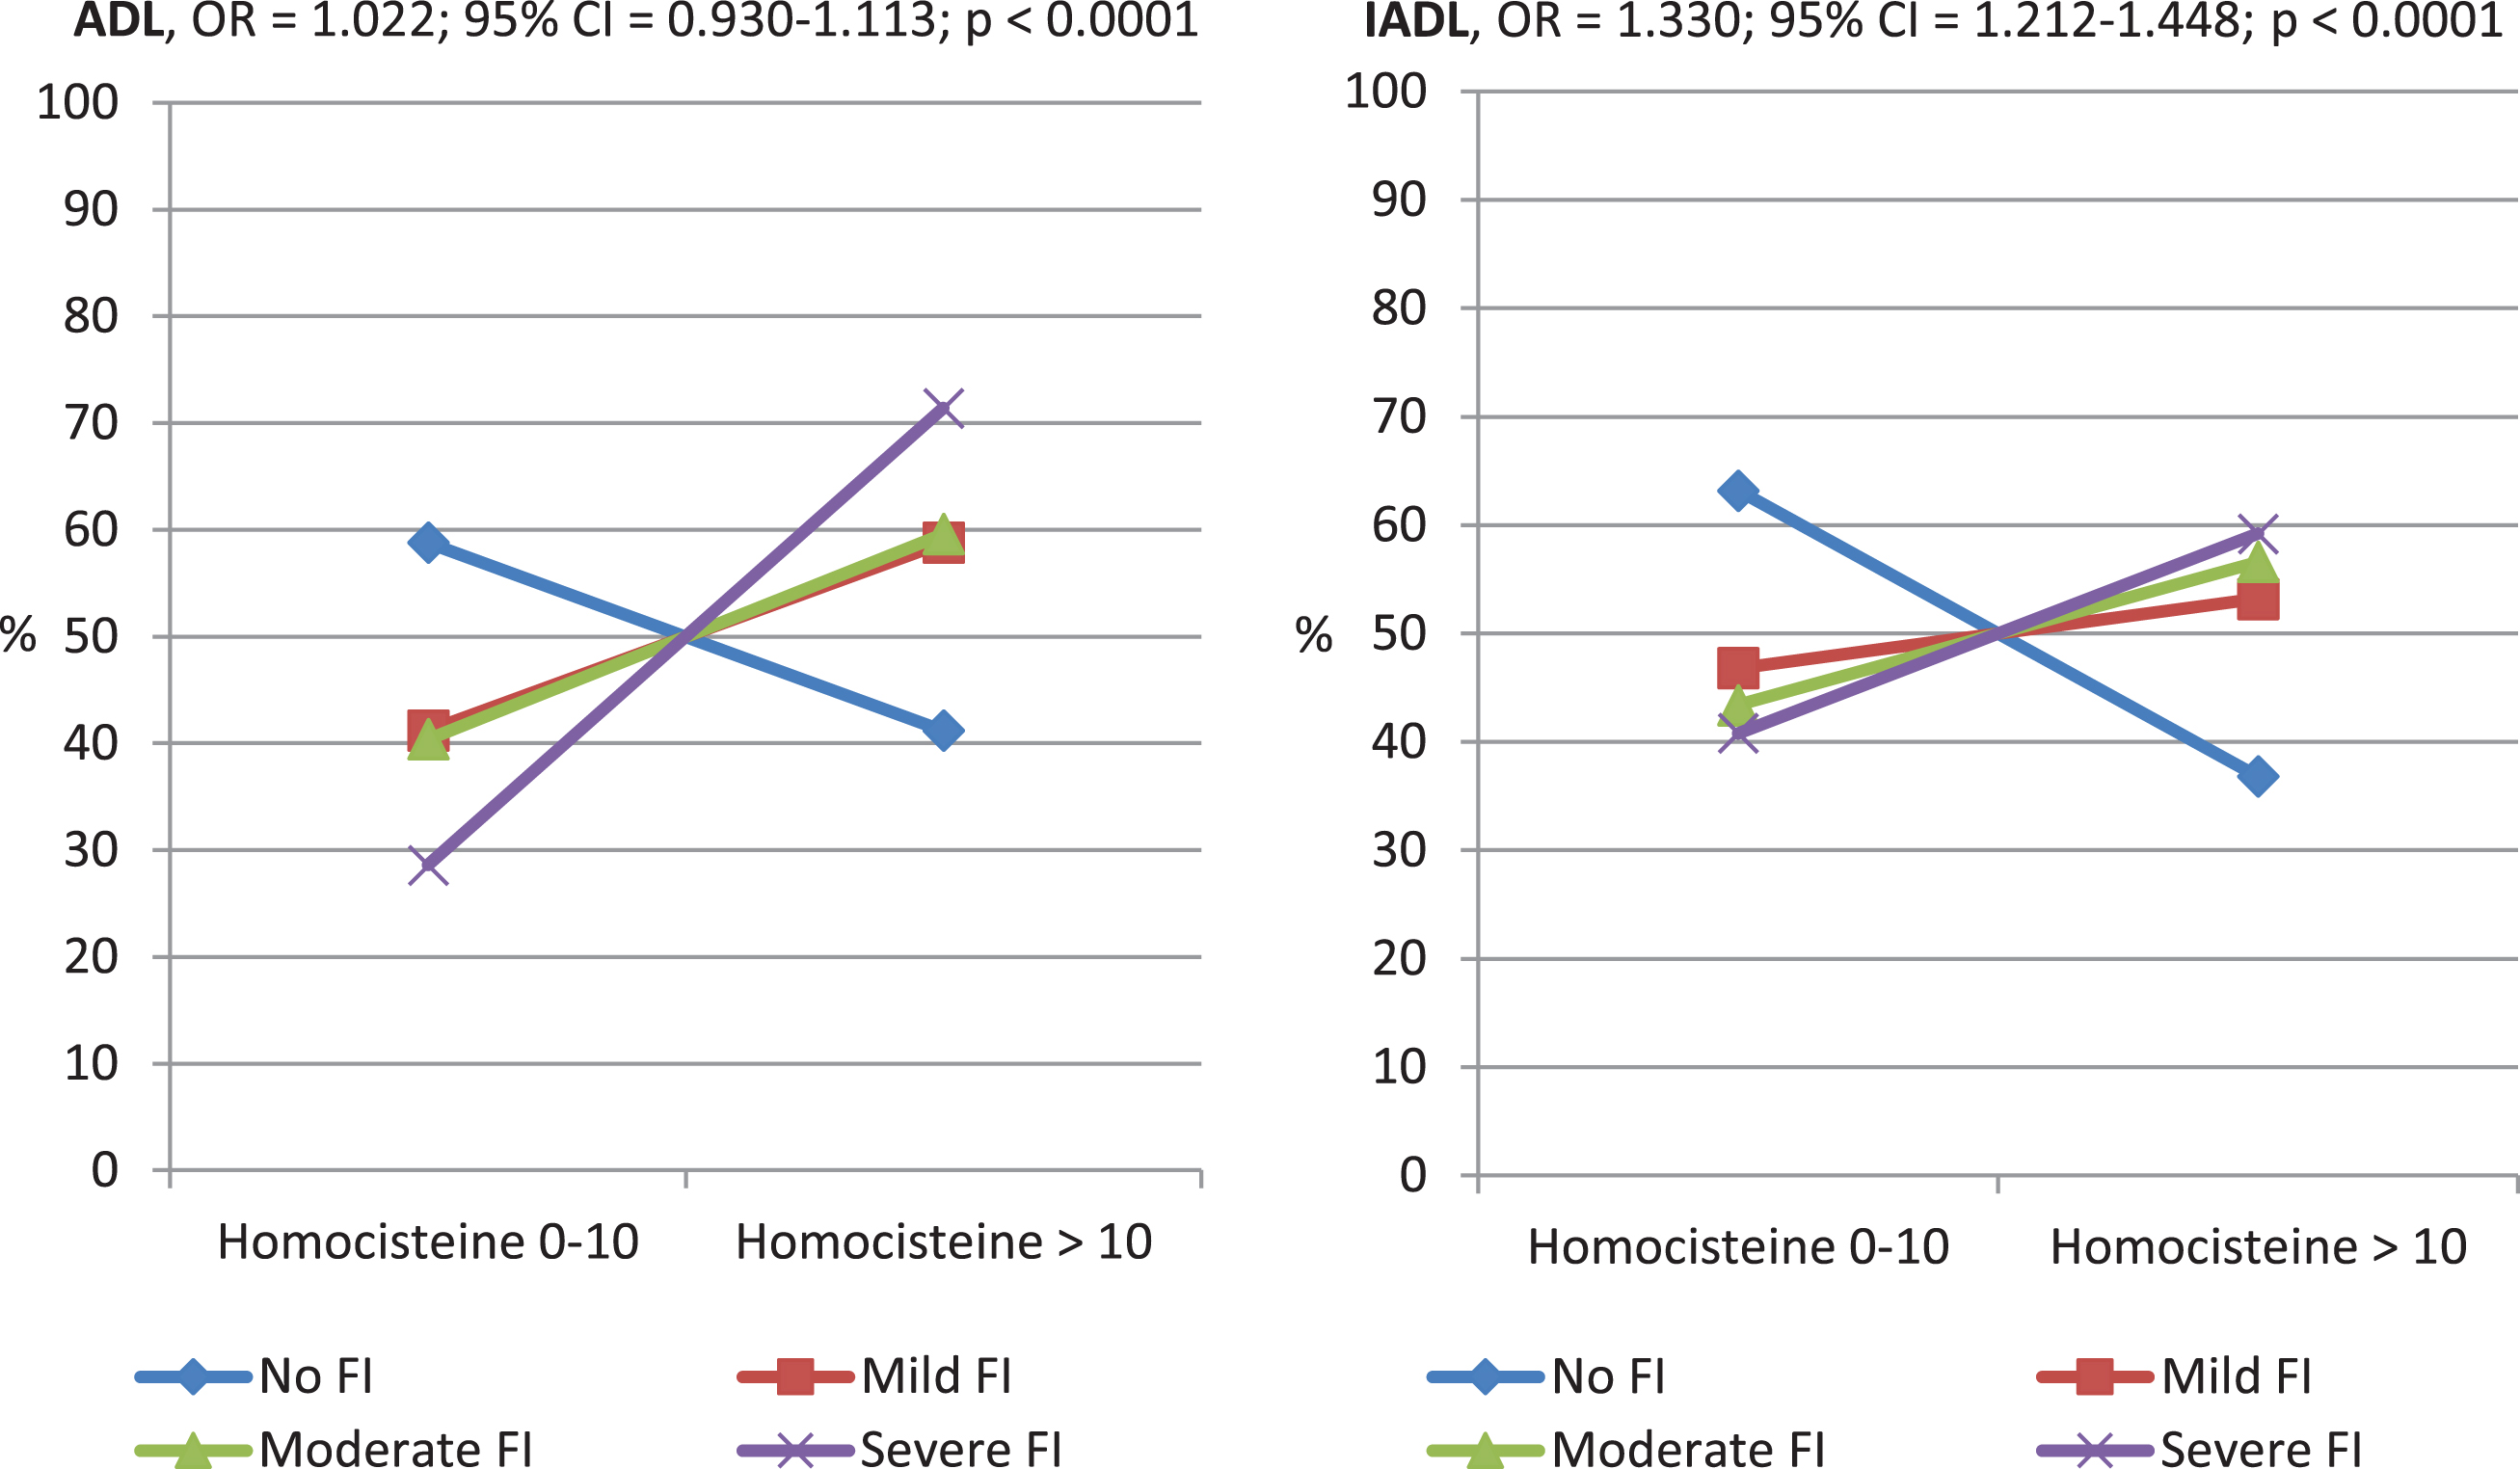 Distribution of homocysteine levels according to the functional impairment (FI) severity evaluated by Activity of Daily Living (ADL) and Instrumental Activity of Daily Living (IADL).